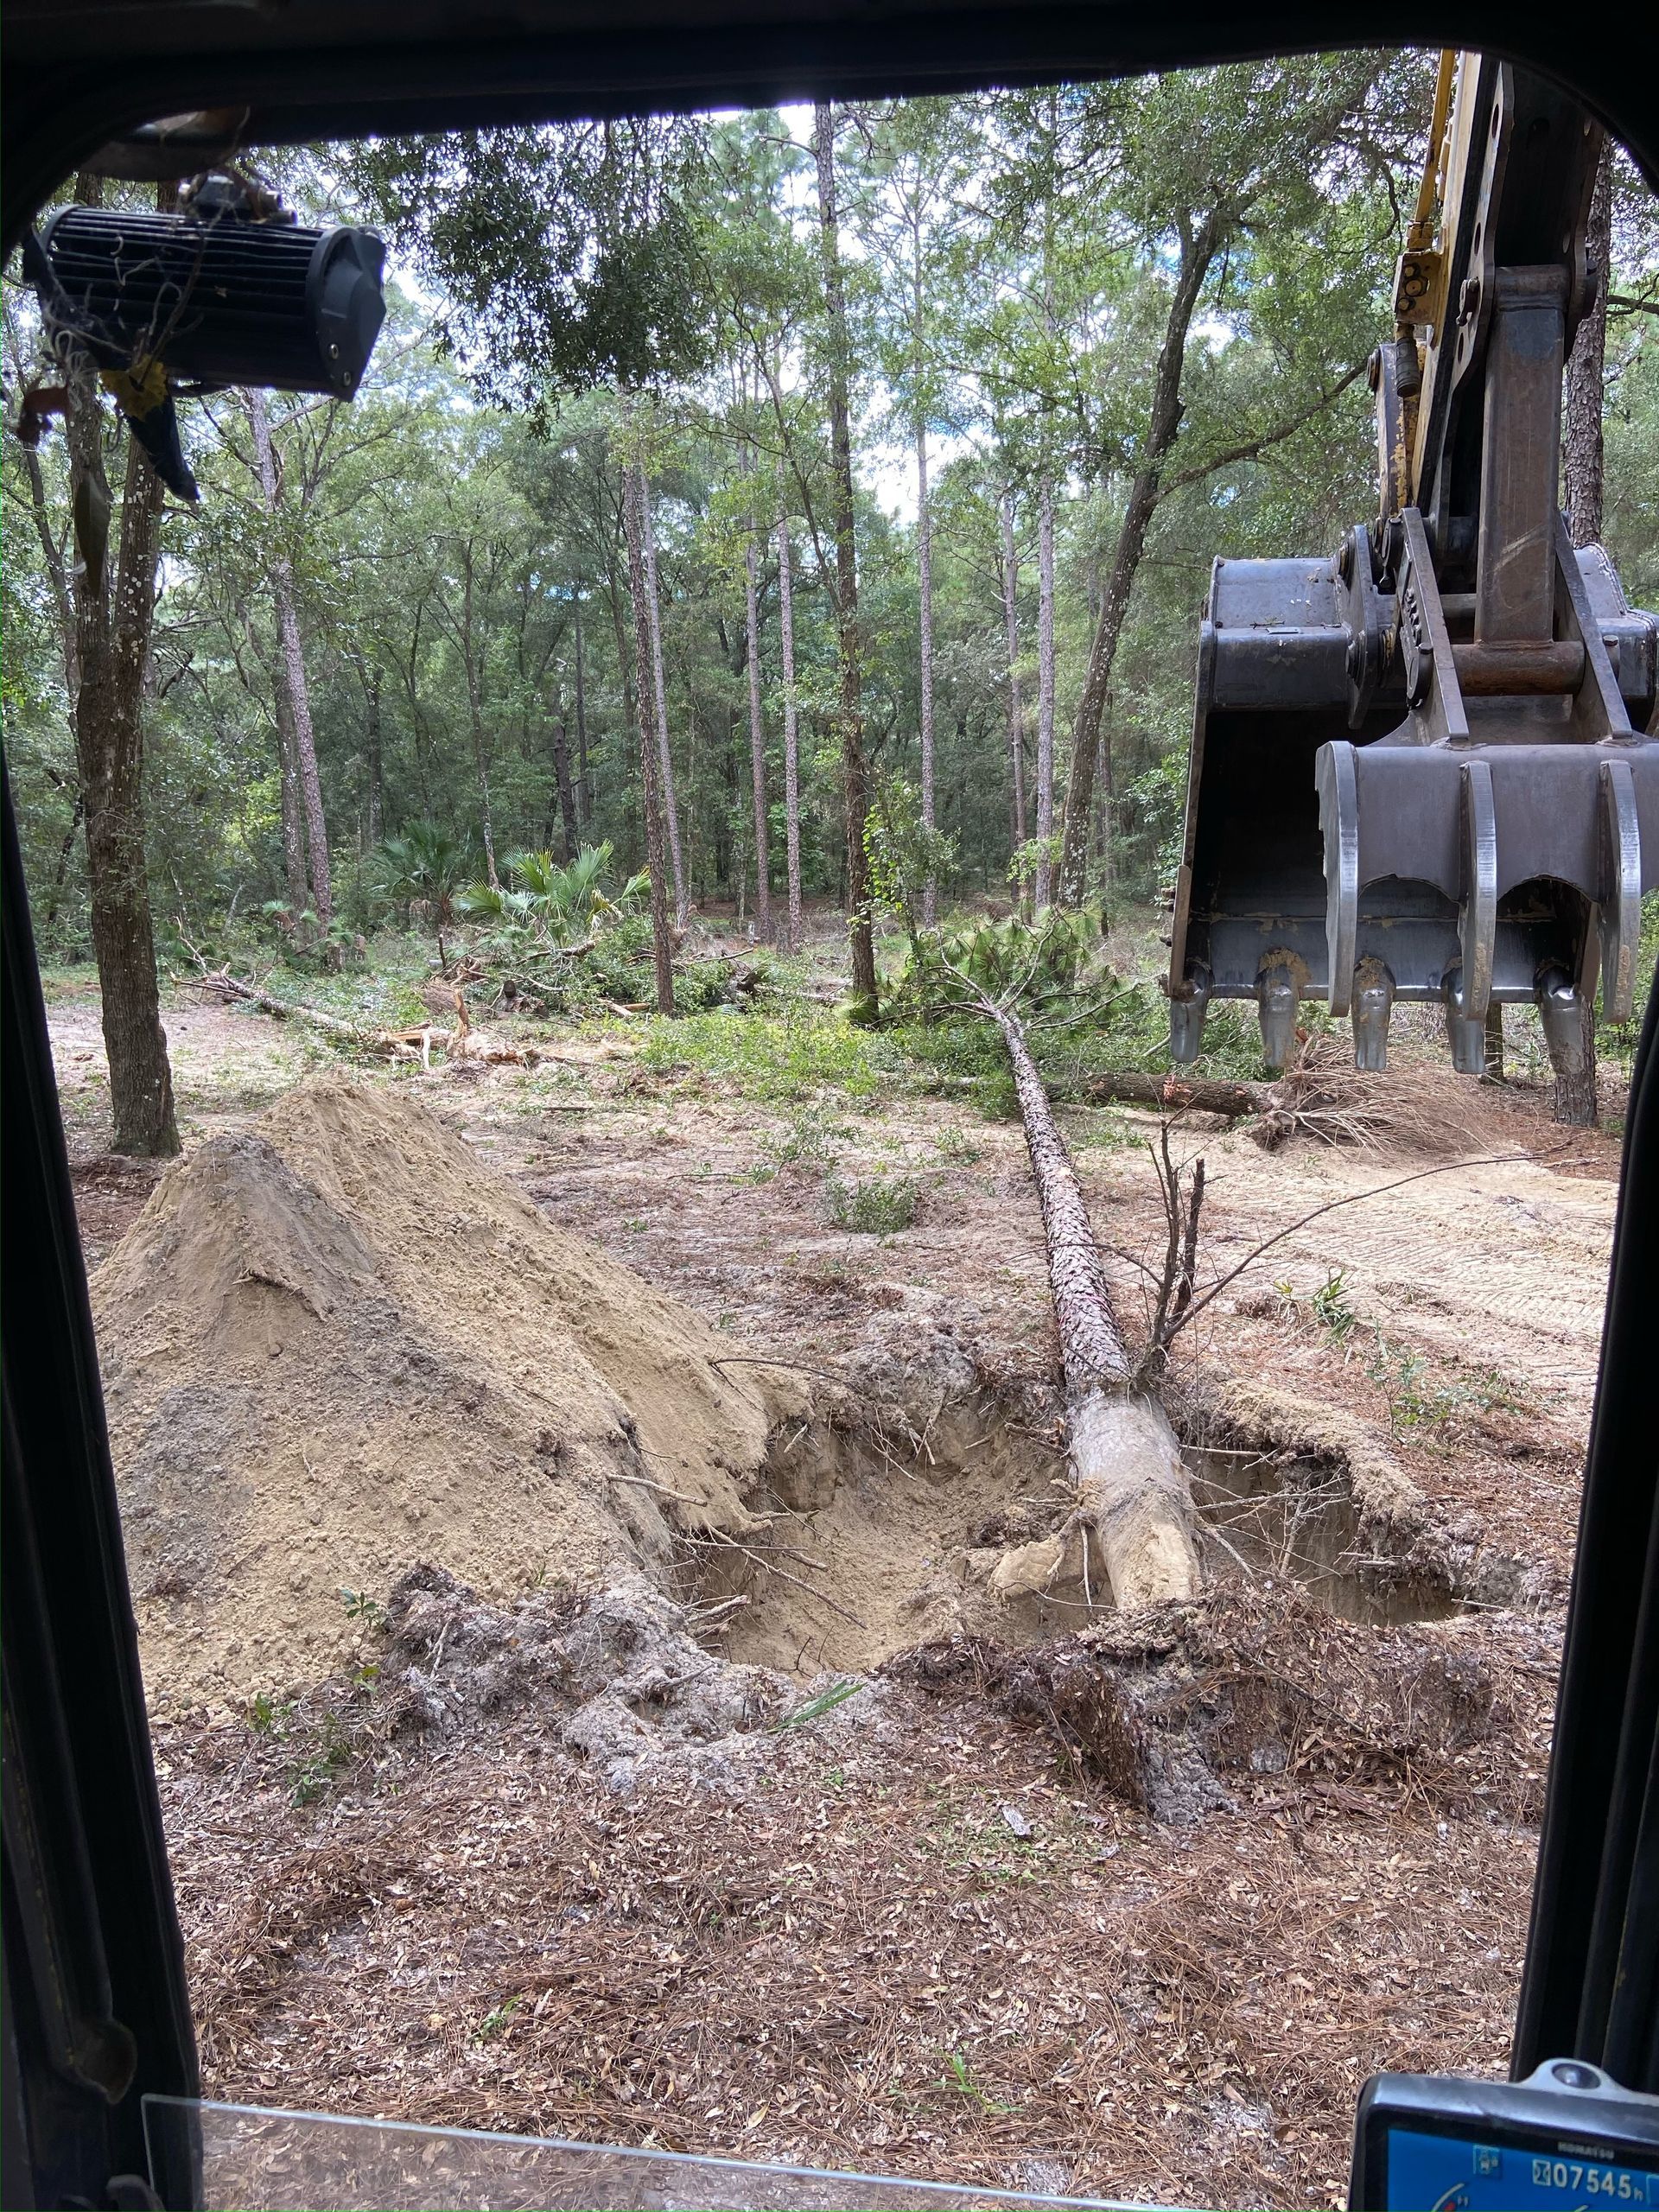 A person is driving a bulldozer through a forest.